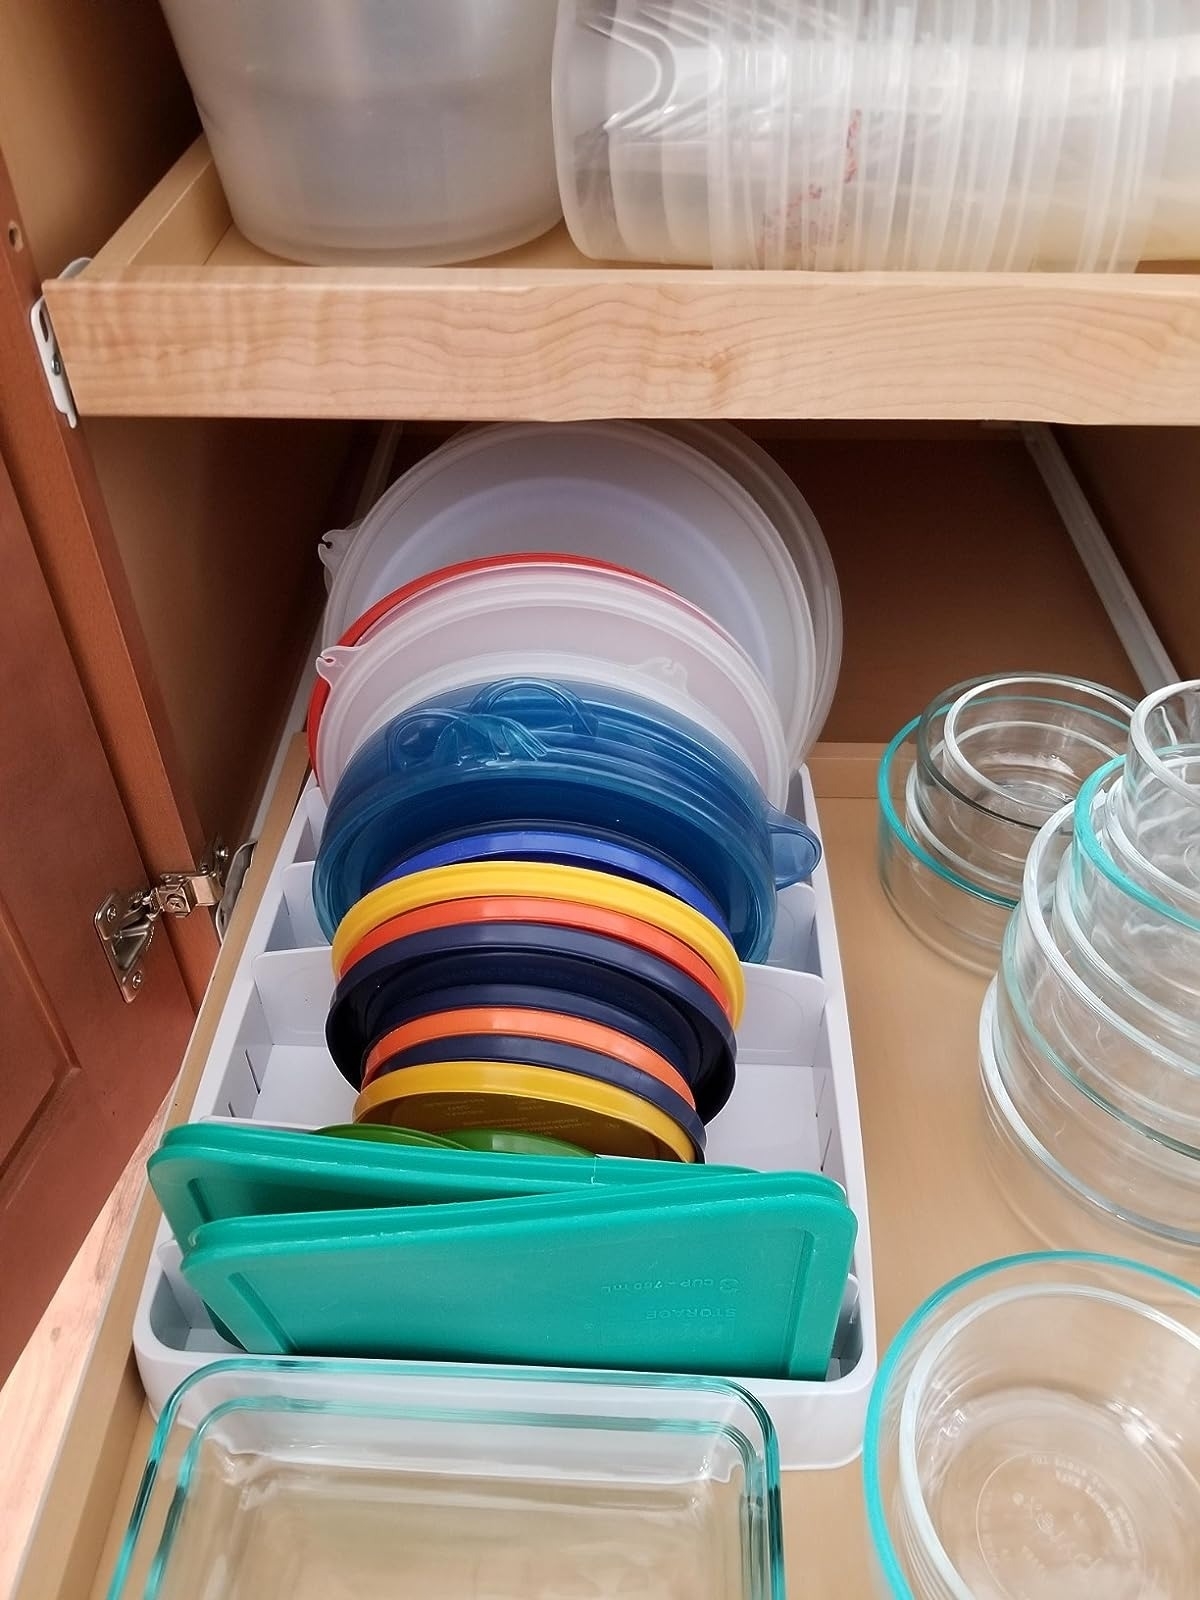 the lid organizer with green rectangle-shaped and blue round-shaped plastic lid containers